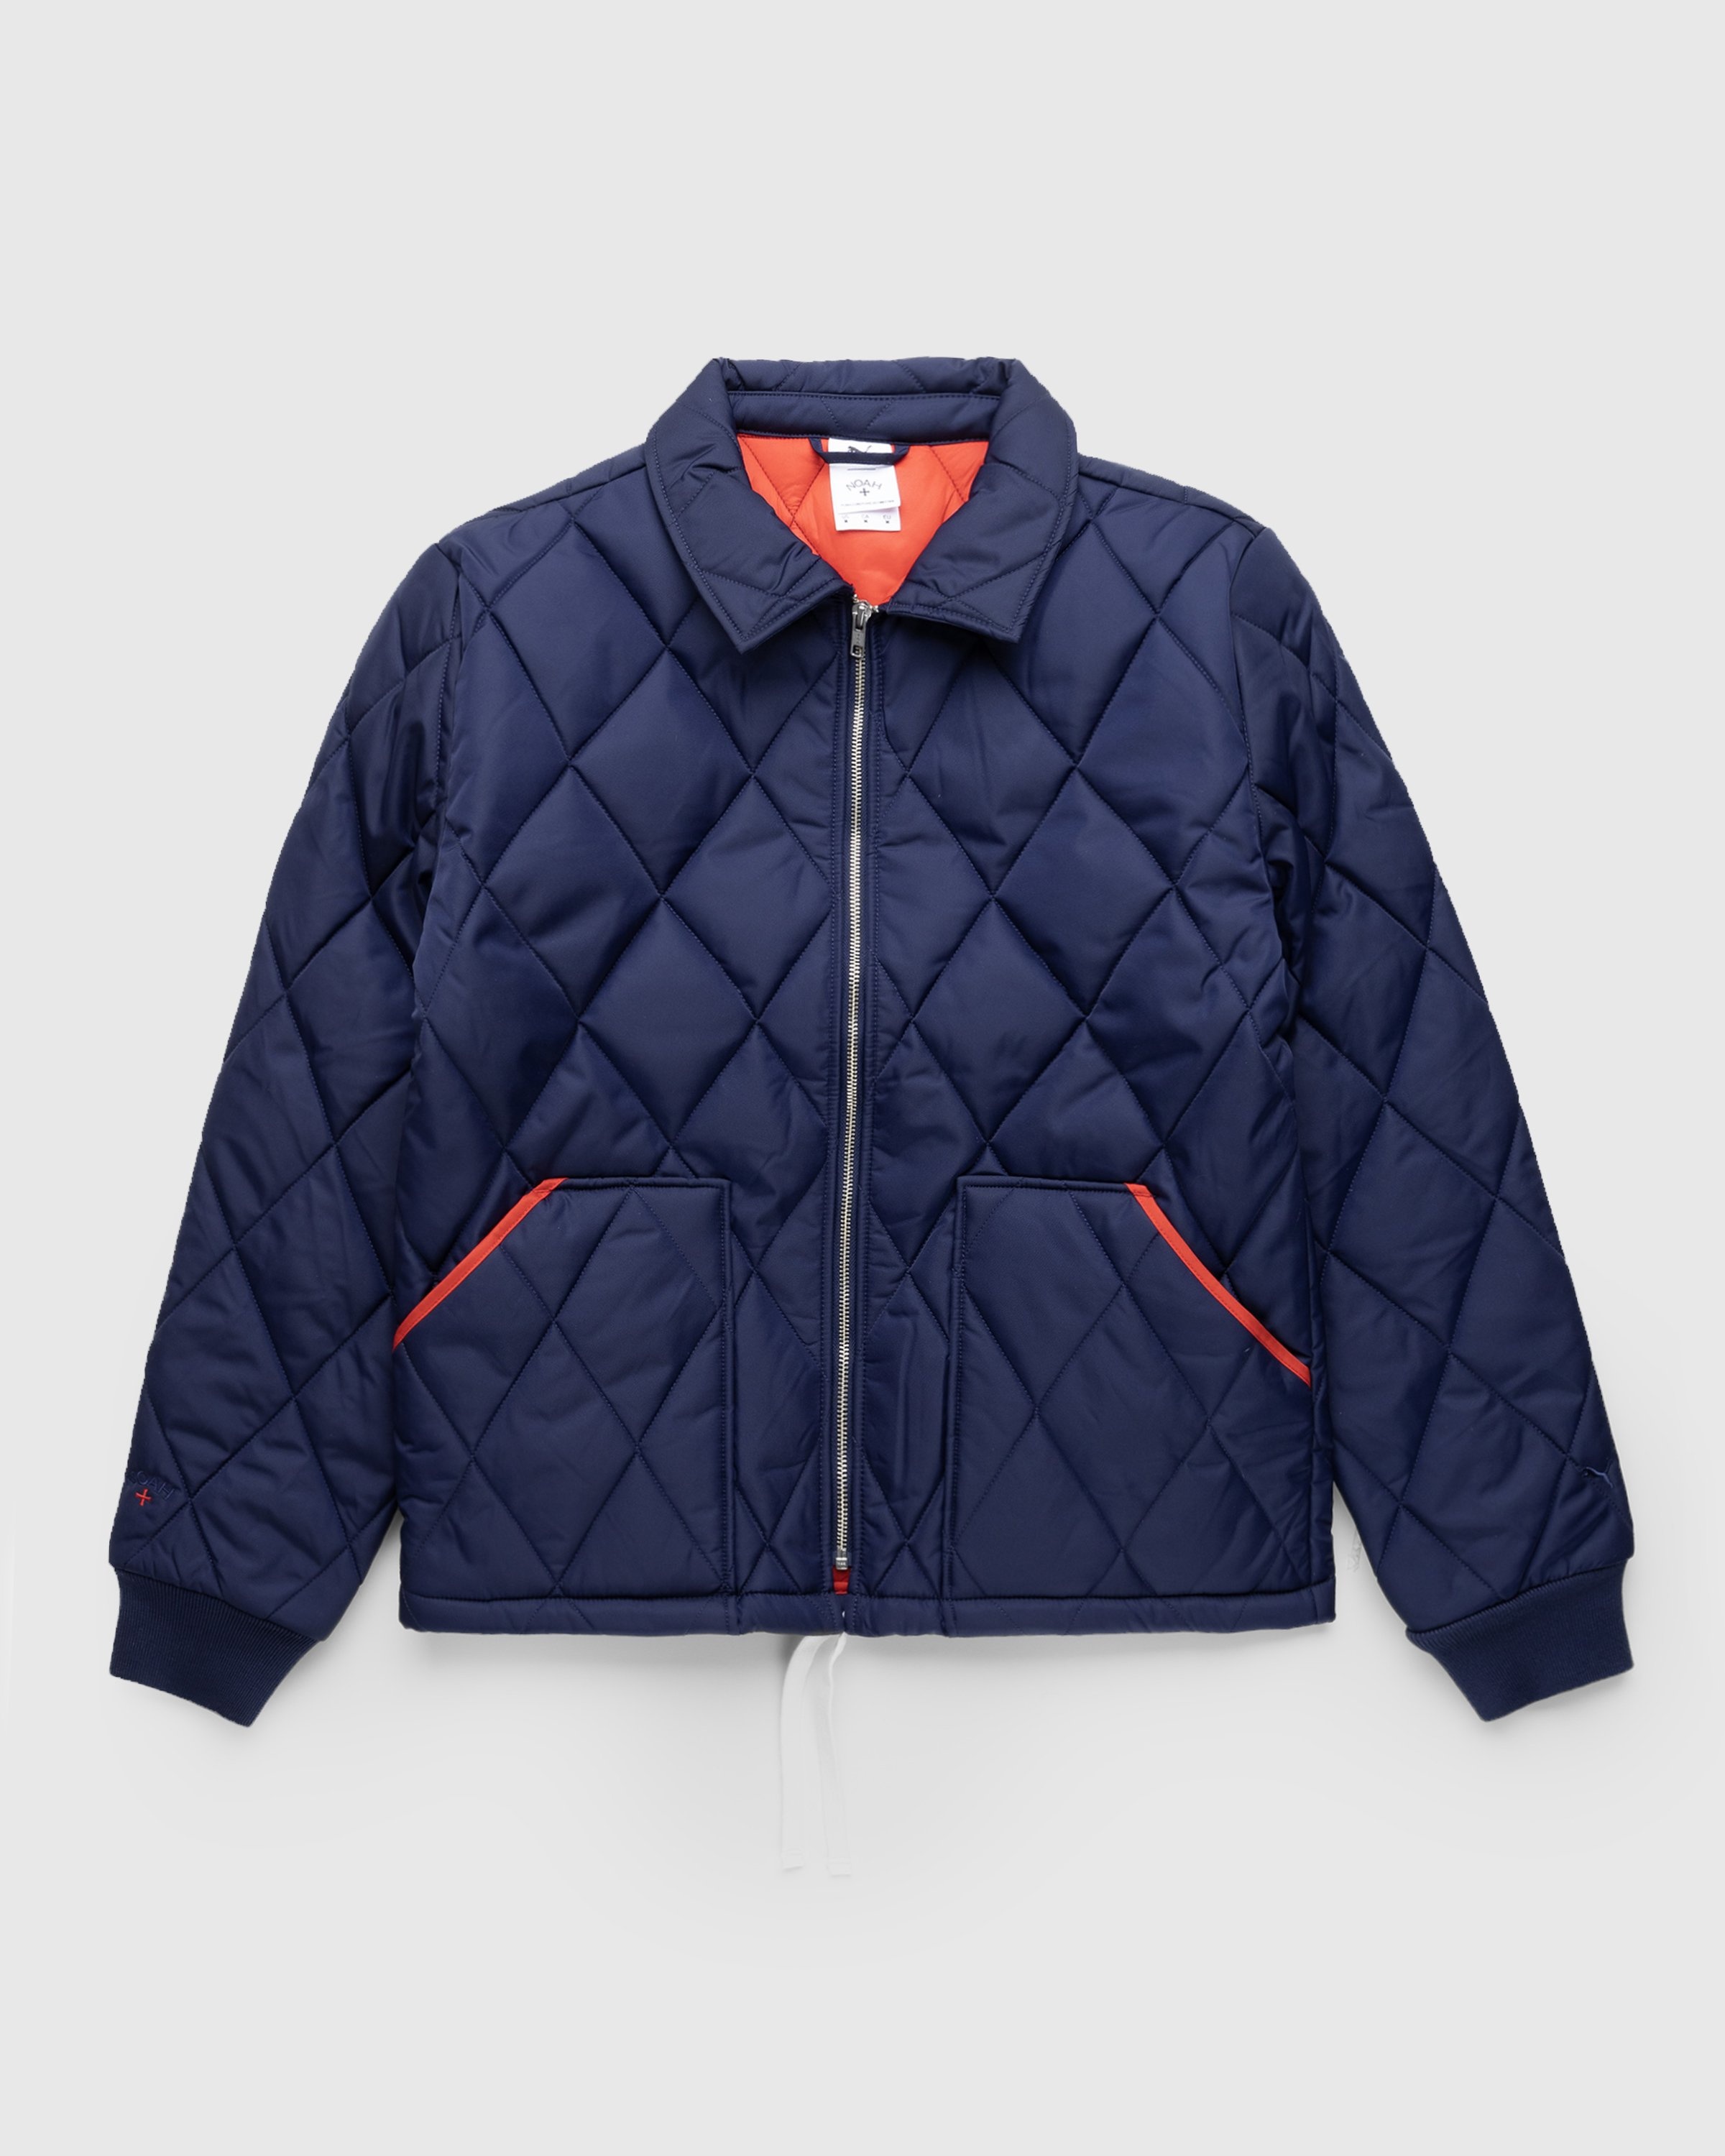 Puma x Noah – Water-Repellent Quilted Jacket Navy | Highsnobiety Shop